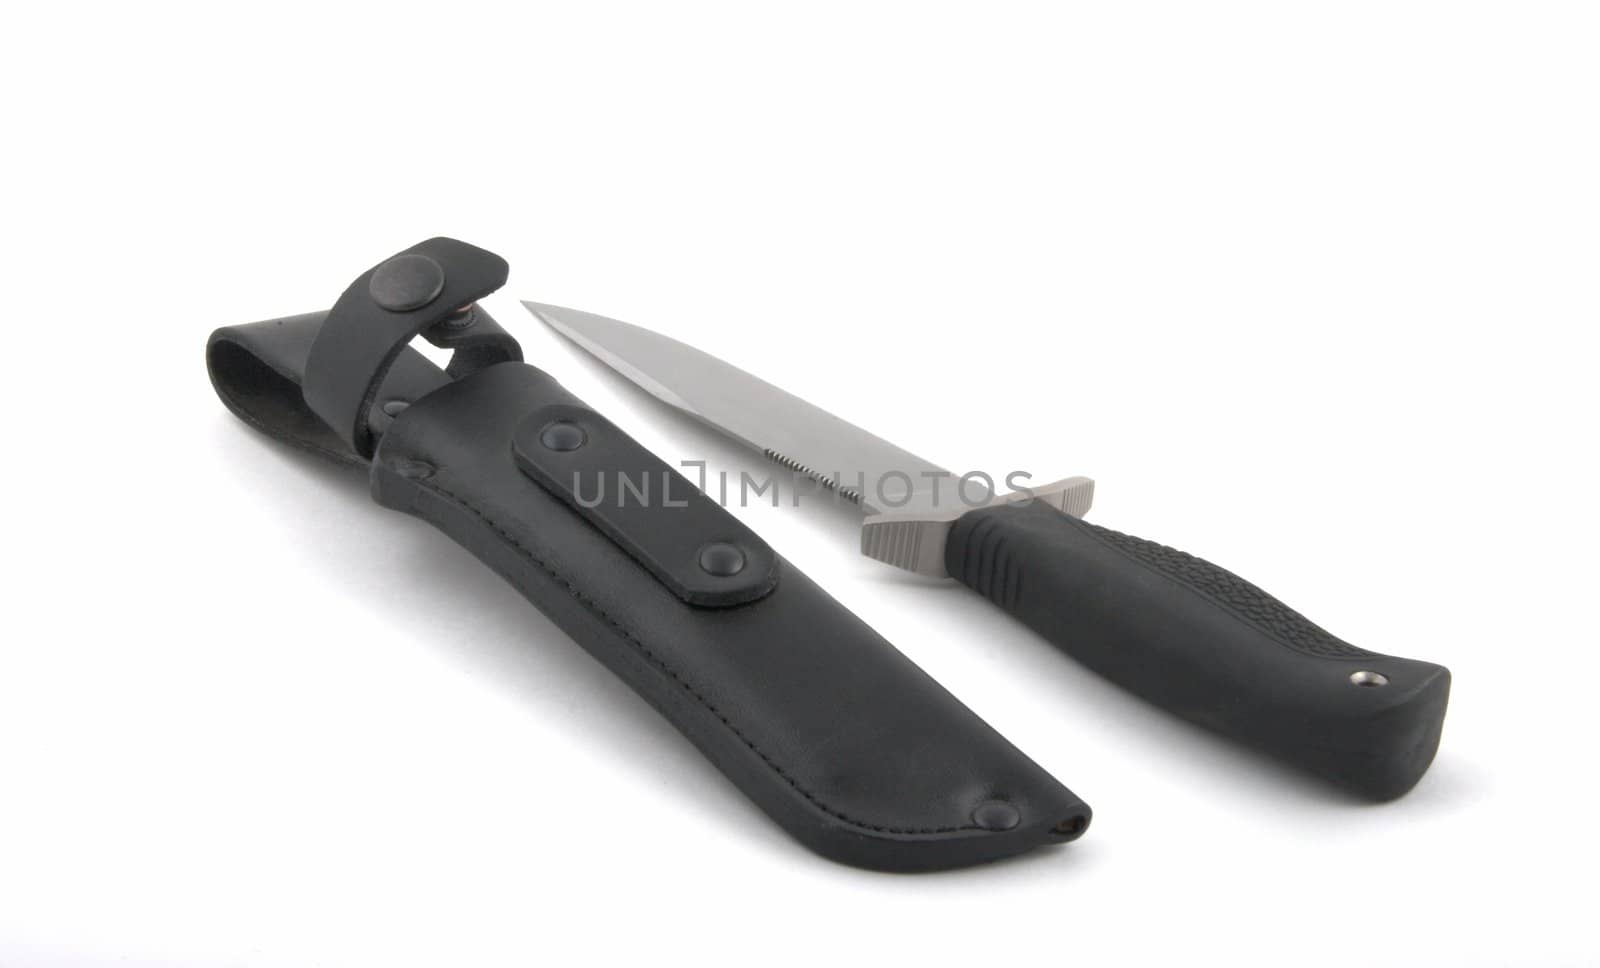 Army knife with the rubber handle on a white background